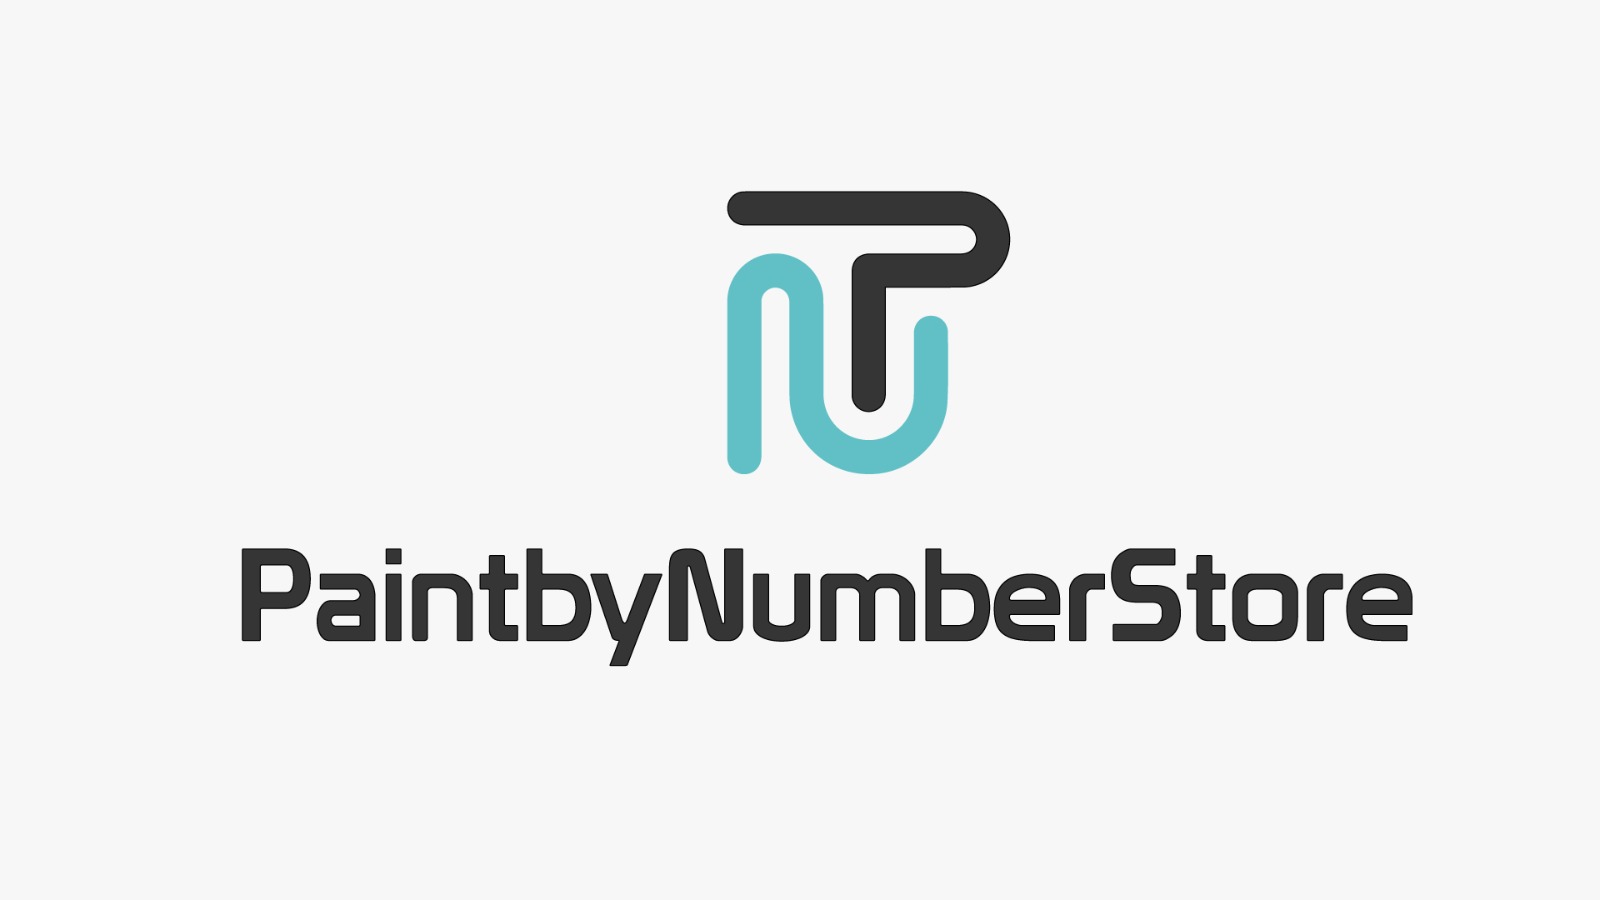 PaintbyNumberStore